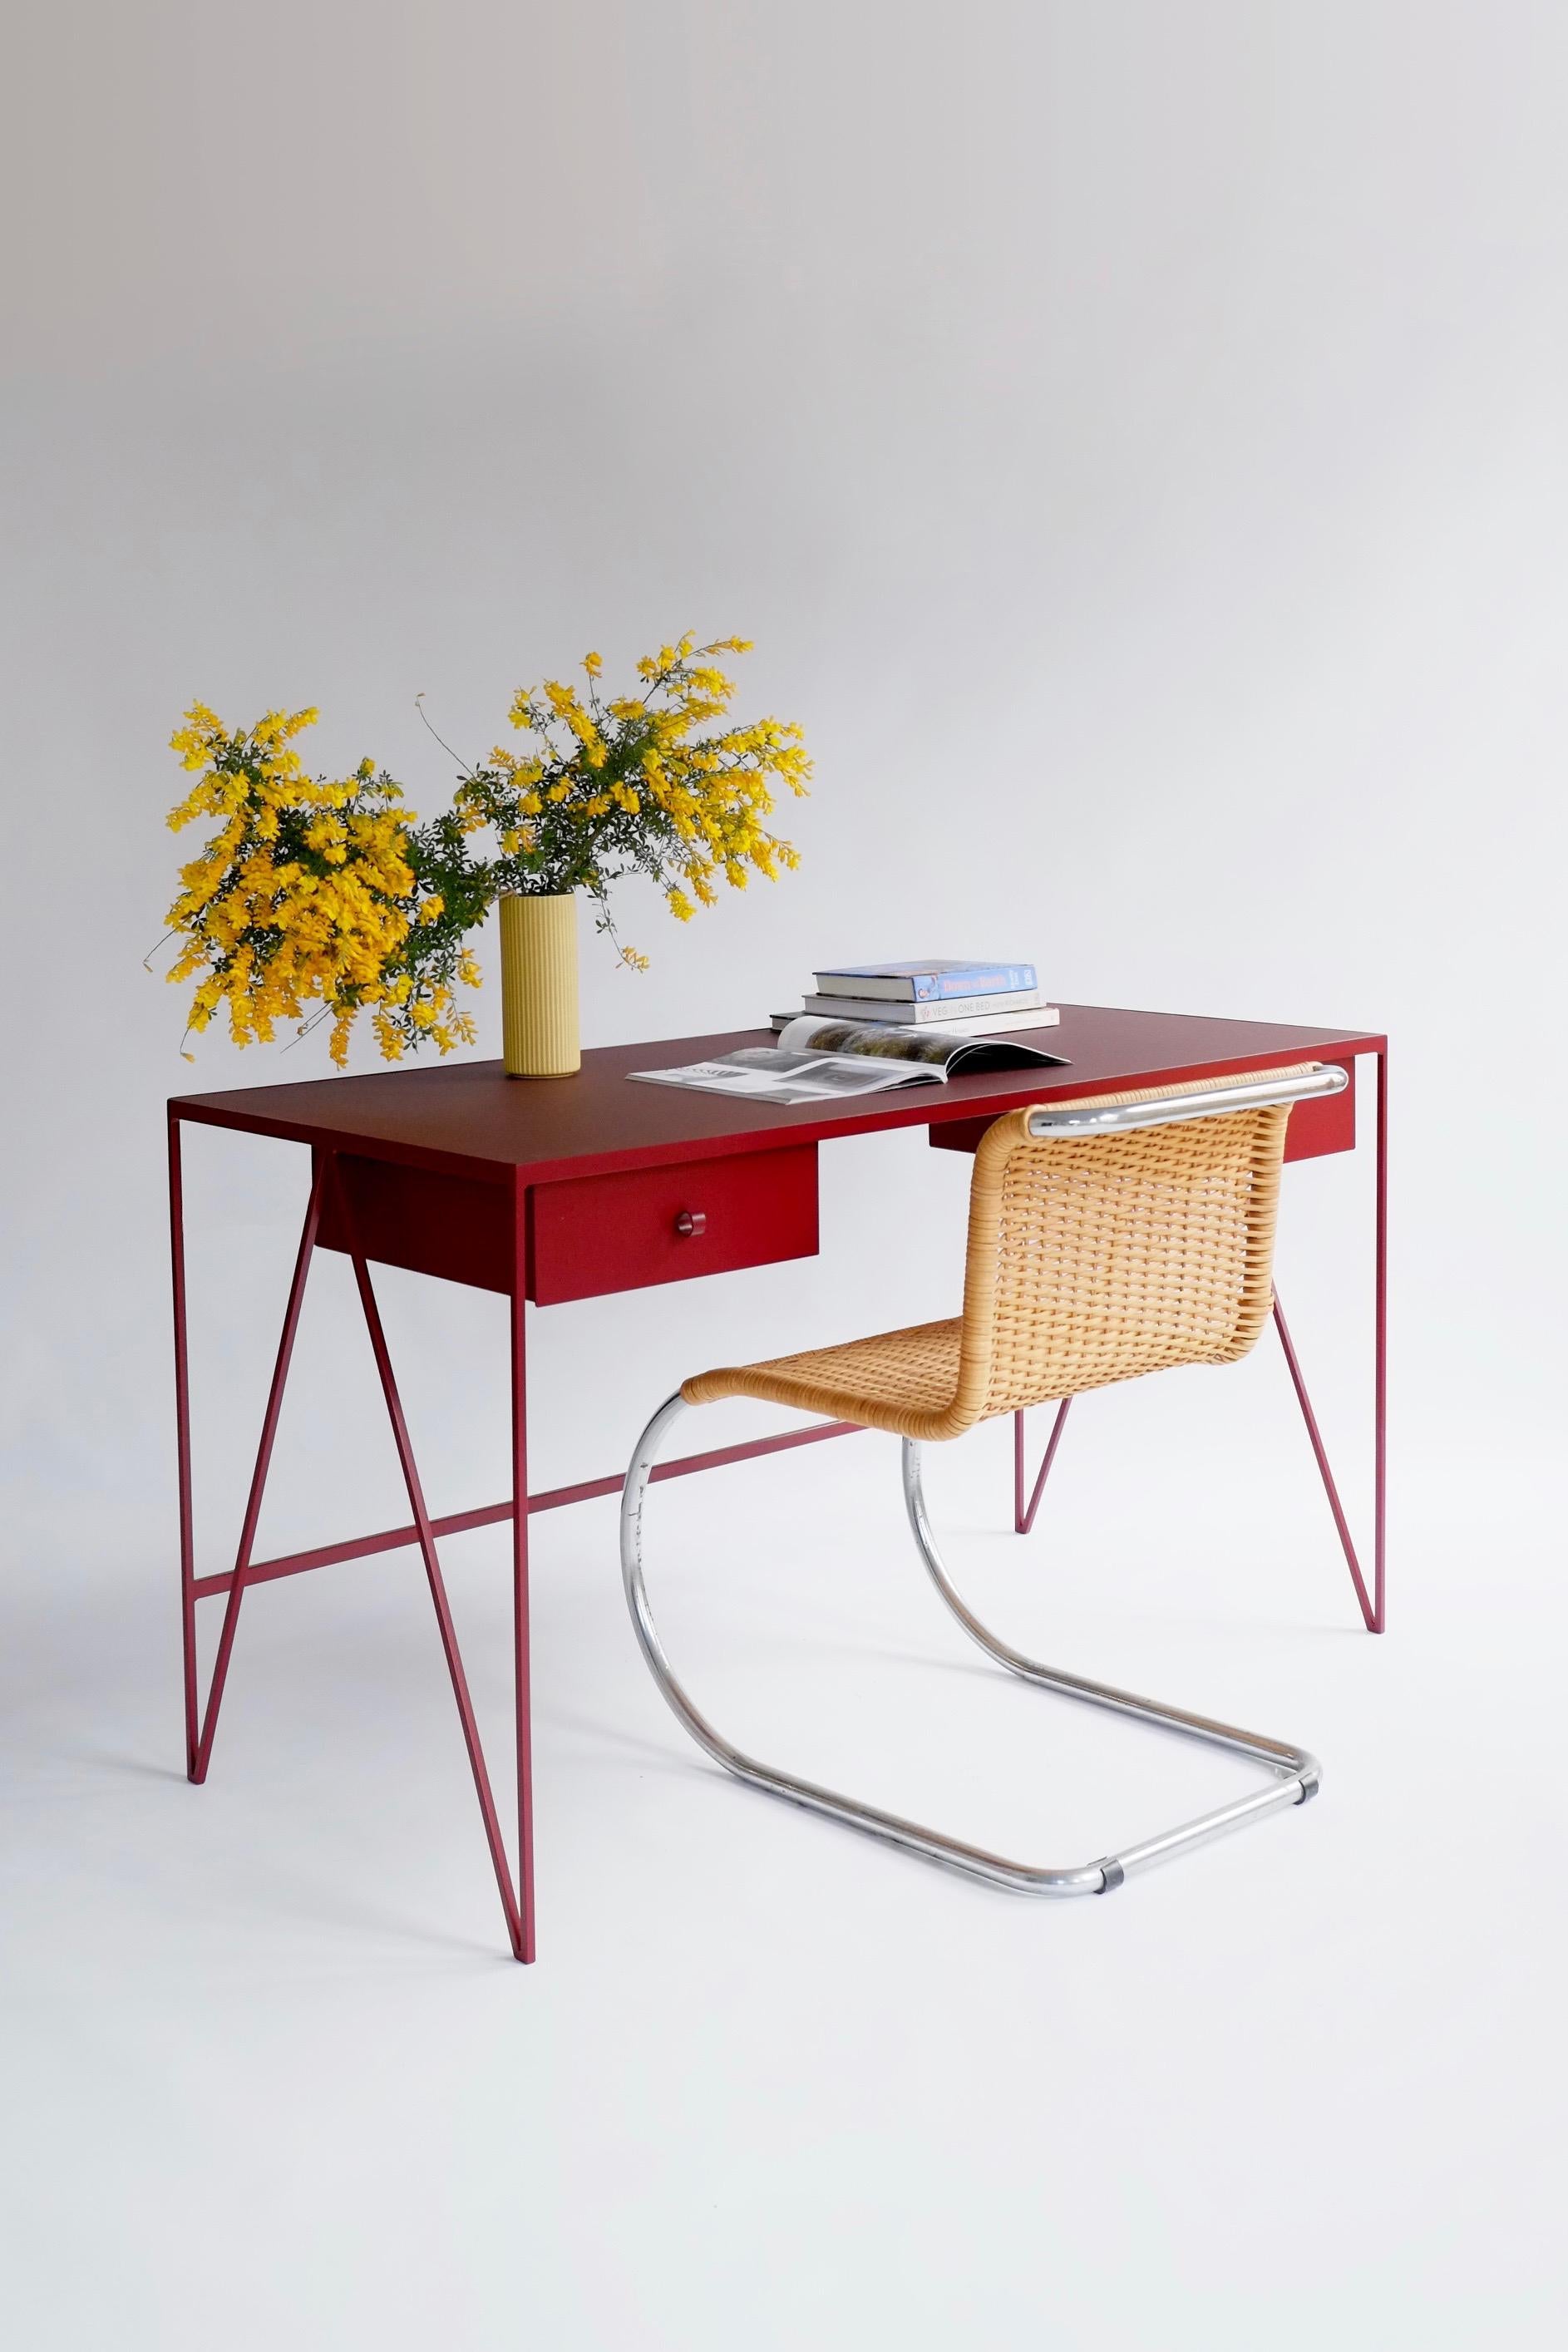 This large beetroot color study desk is made with a powder coated steel frame and a beautiful natural linoleum top made out of linseed oil. This modern minimal desk has two steel drawers suspended underneath the tabletop with our Loop handles. The